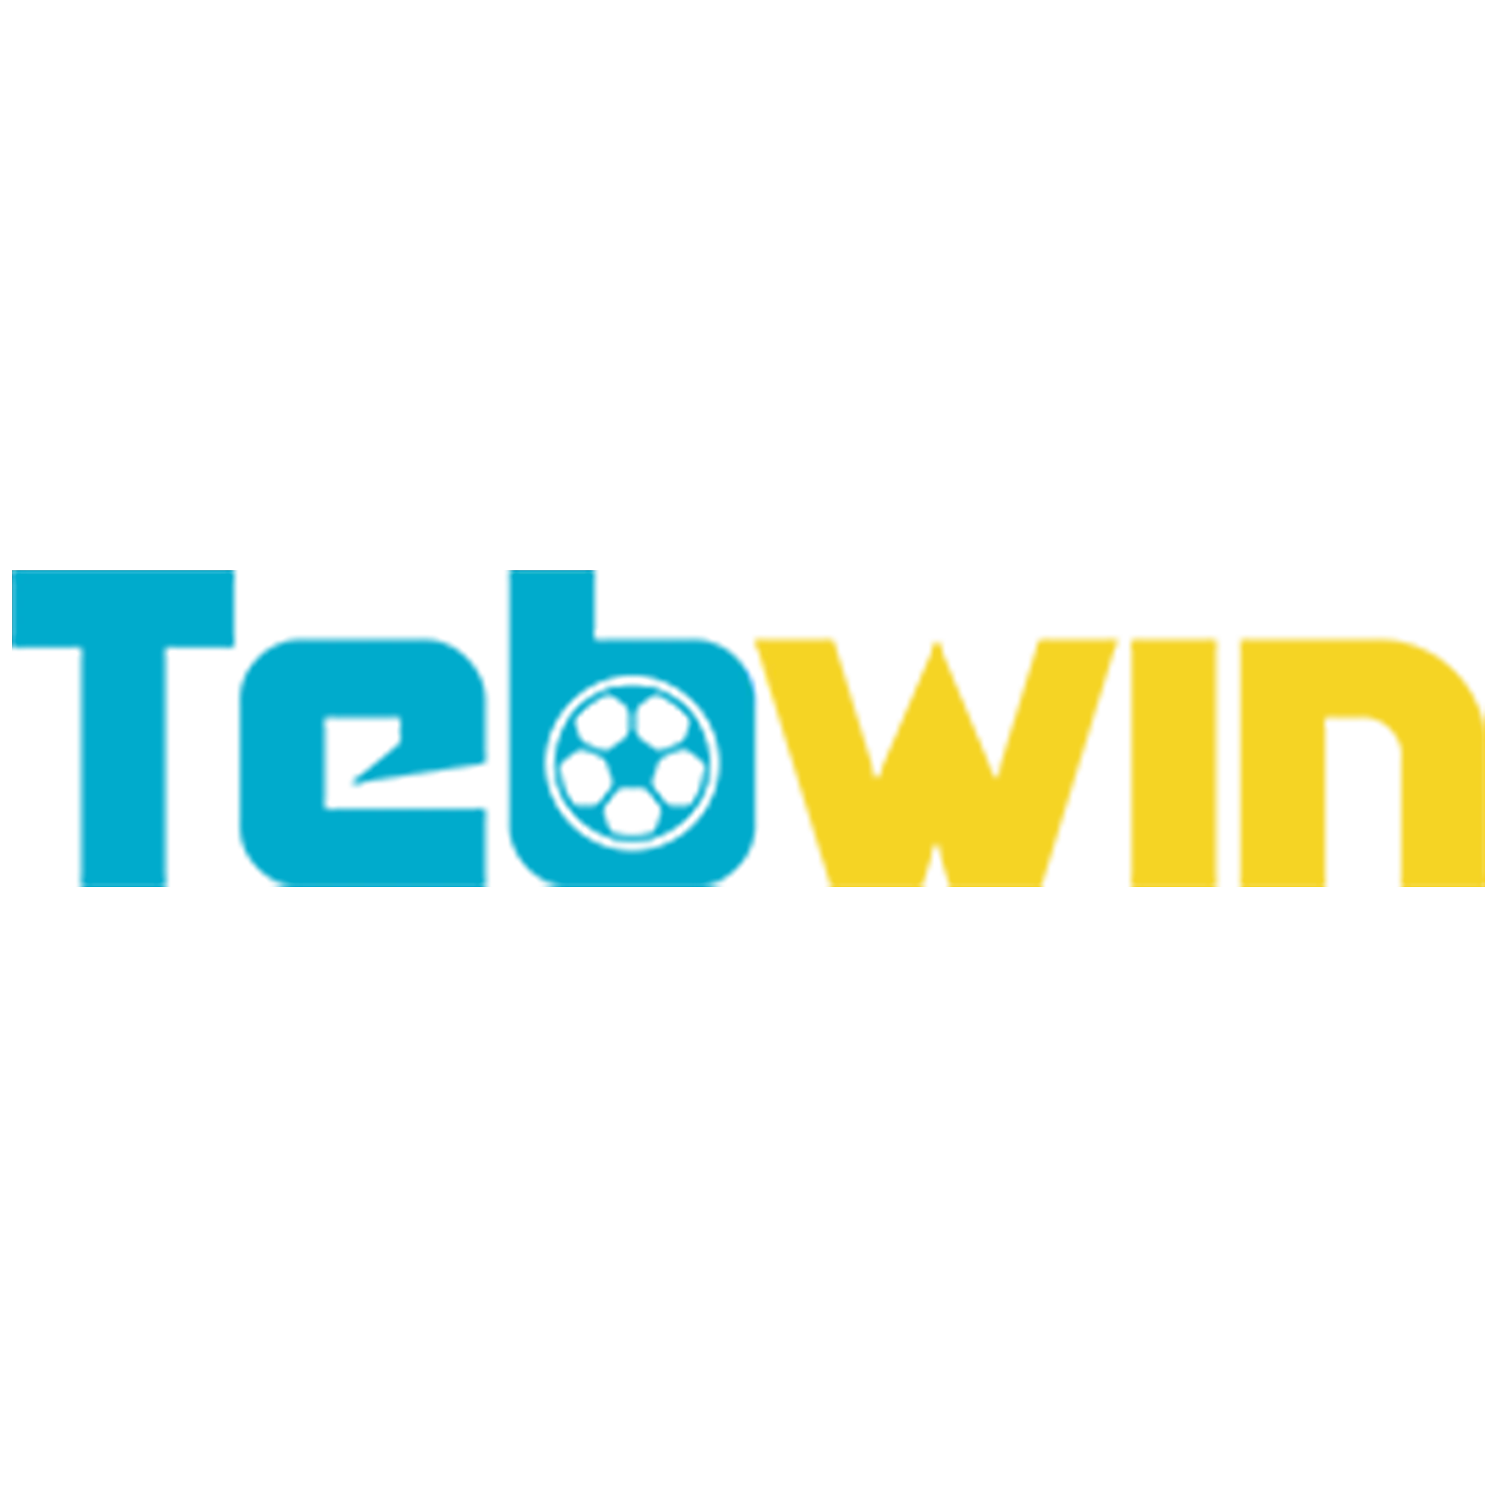 Play at Tebwin online casino and bet on your favorite sporting events.